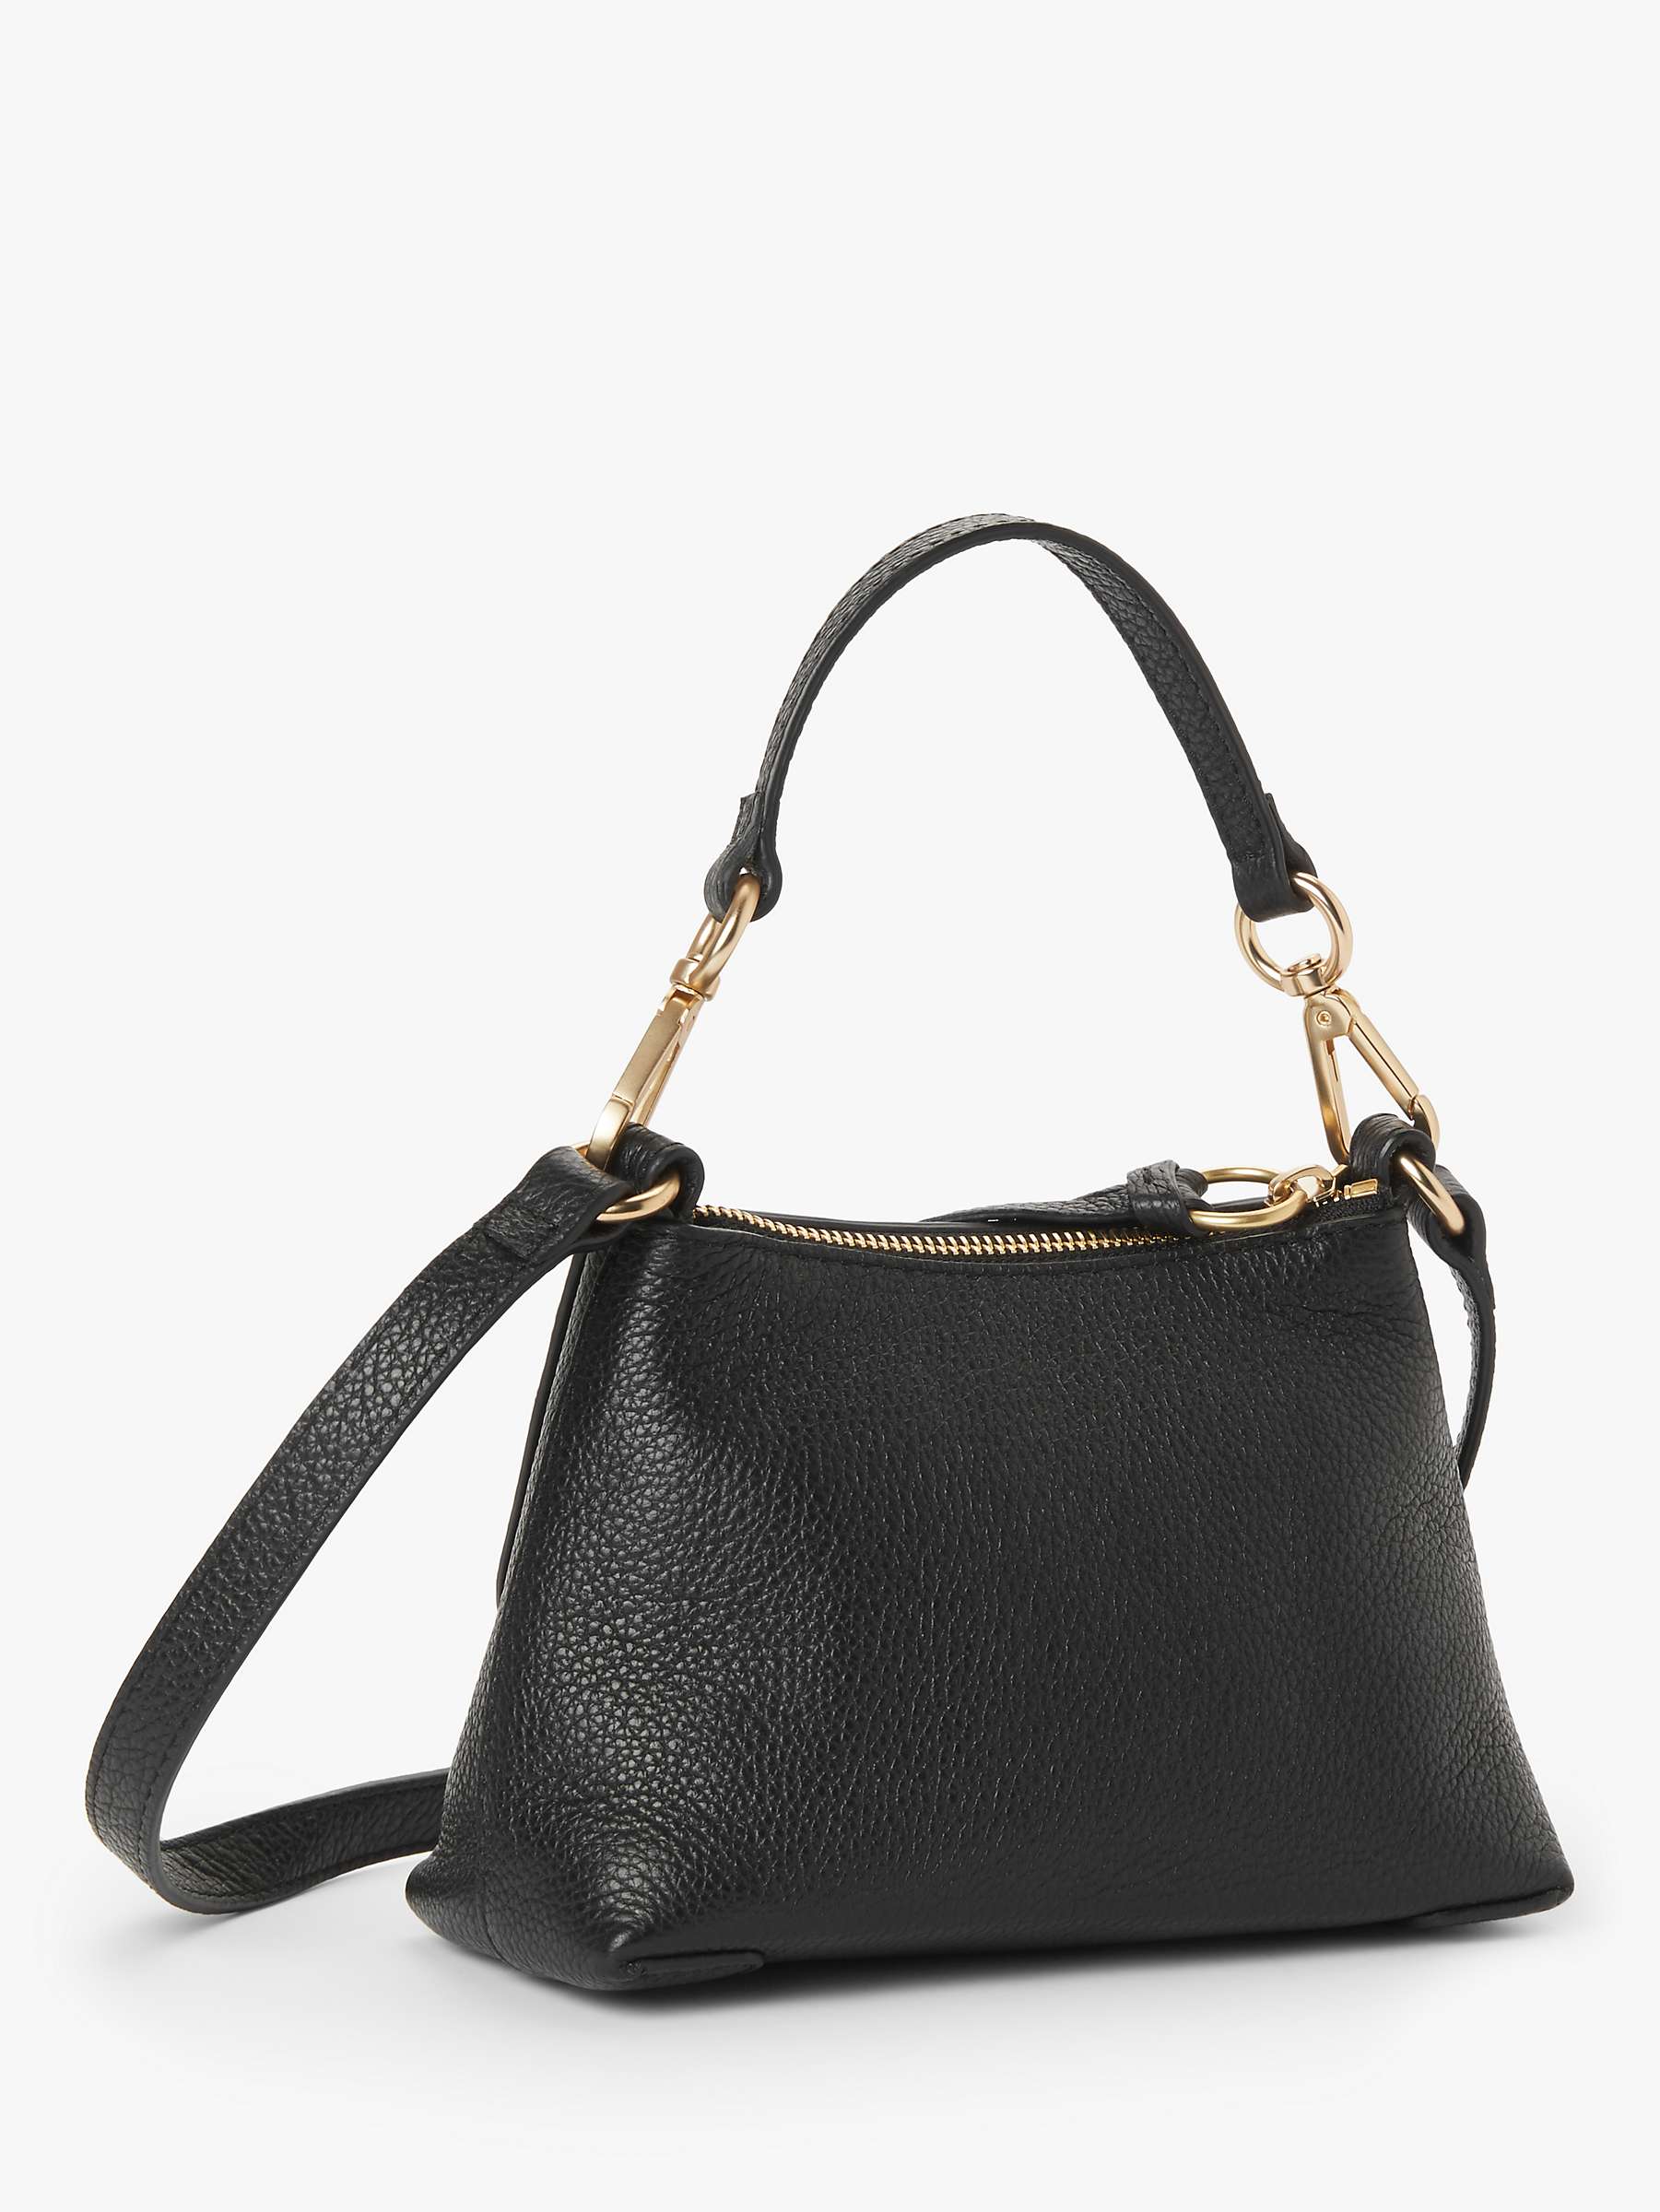 Buy See By Chloé Joan Leather Suede Mini Satchel Bag Online at johnlewis.com